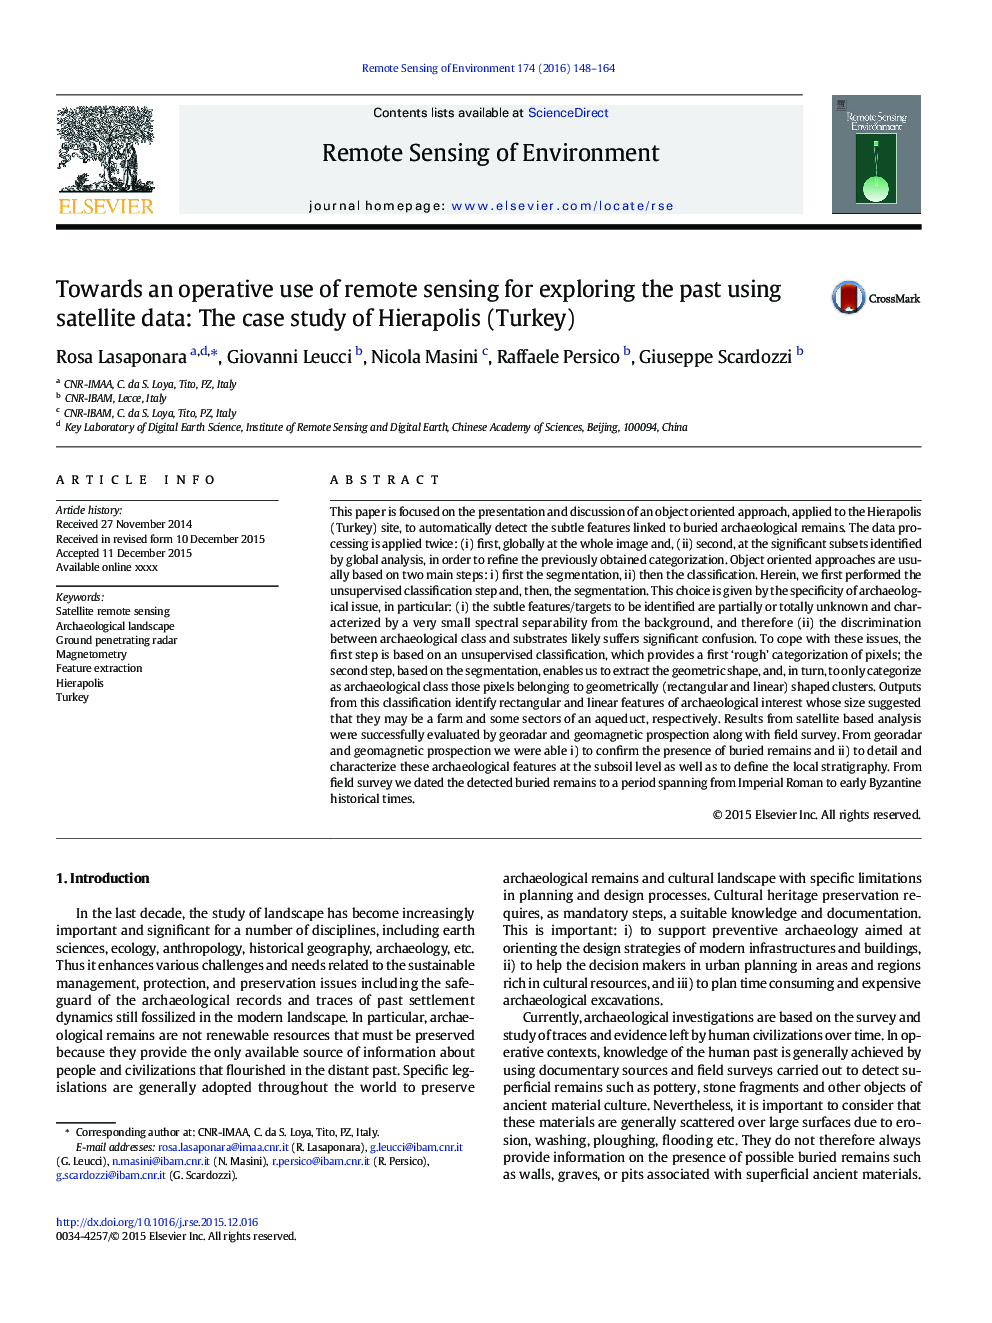 Towards an operative use of remote sensing for exploring the past using satellite data: The case study of Hierapolis (Turkey)